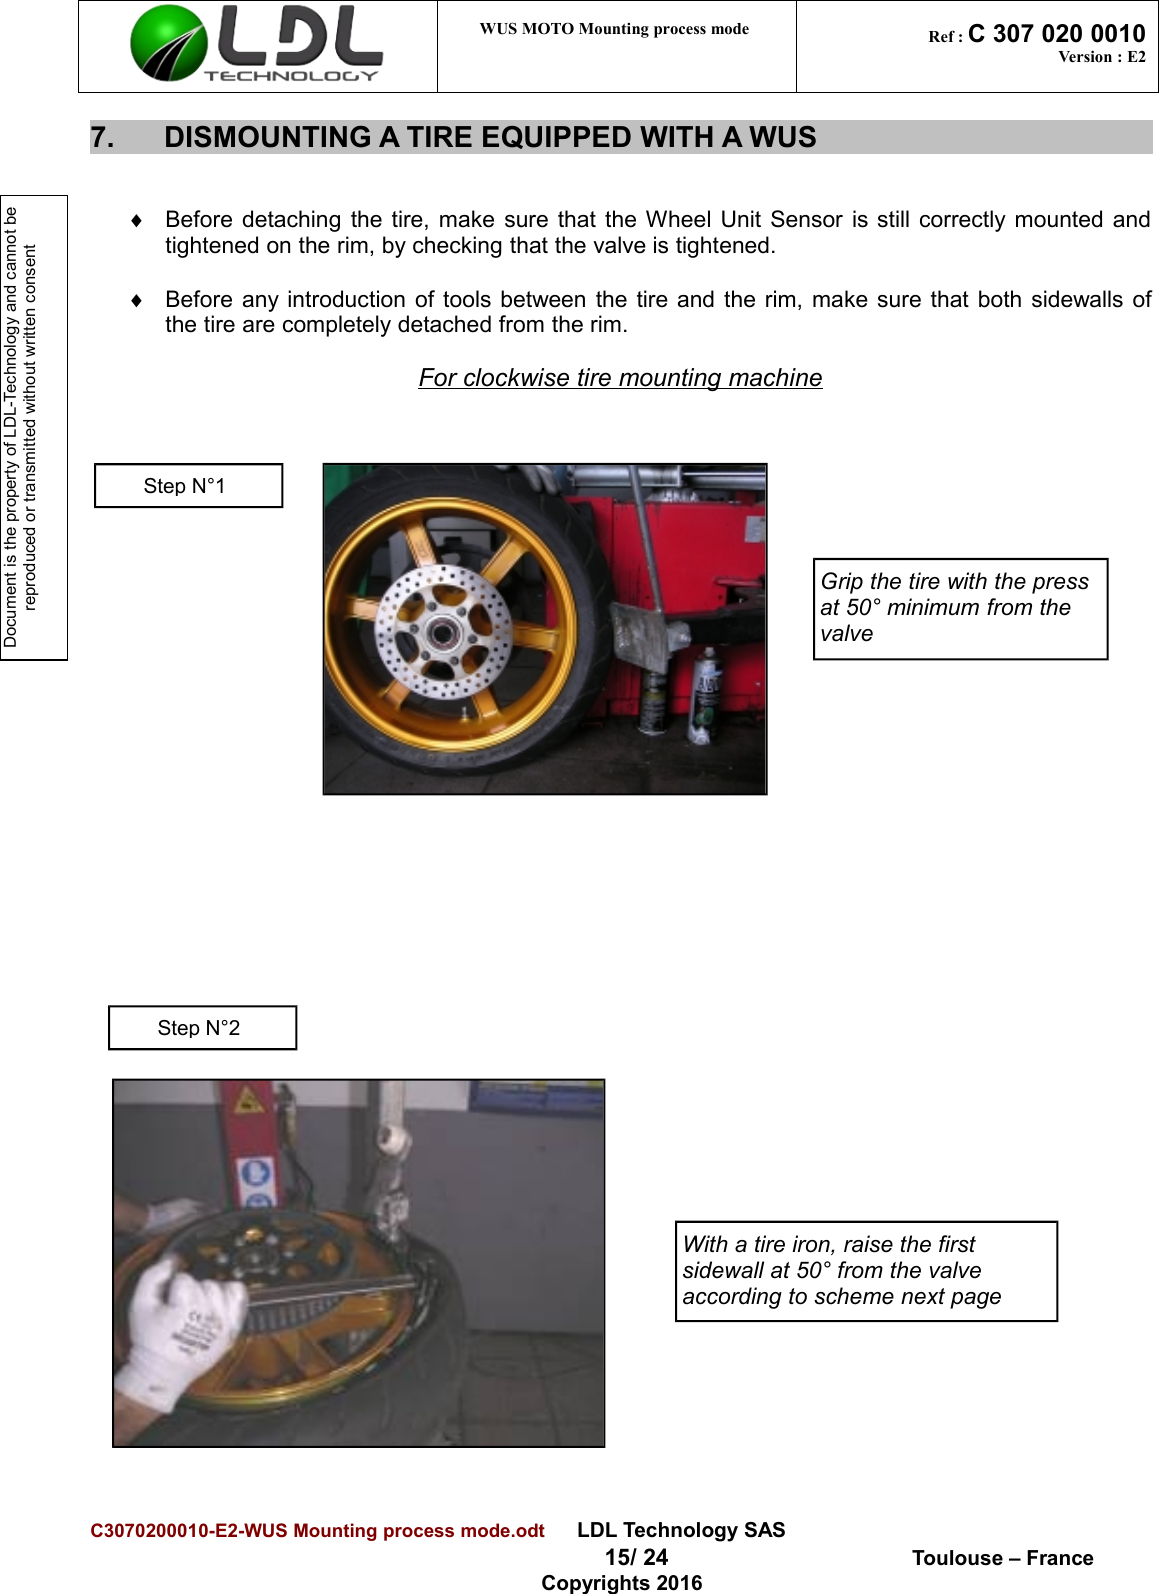 Document is the property of LDL-Technology and cannot be reproduced or transmitted without written consent WUS MOTO Mounting process mode  Ref : C 307 020 0010Version : E27. DISMOUNTING A TIRE EQUIPPED WITH A WUS¨Before detaching the tire, make sure that the Wheel Unit Sensor is still correctly mounted andtightened on the rim, by checking that the valve is tightened.¨Before any introduction of tools between the tire and the rim, make sure that both sidewalls ofthe tire are completely detached from the rim.For clockwise tire mounting machineC3070200010-E2-WUS Mounting process mode.odt      LDL Technology SAS  15/ 24  Toulouse – FranceCopyrights 2016Grip the tire with the press at 50° minimum from the valveWith a tire iron, raise the first sidewall at 50° from the valve according to scheme next pageStep N°1Step N°2